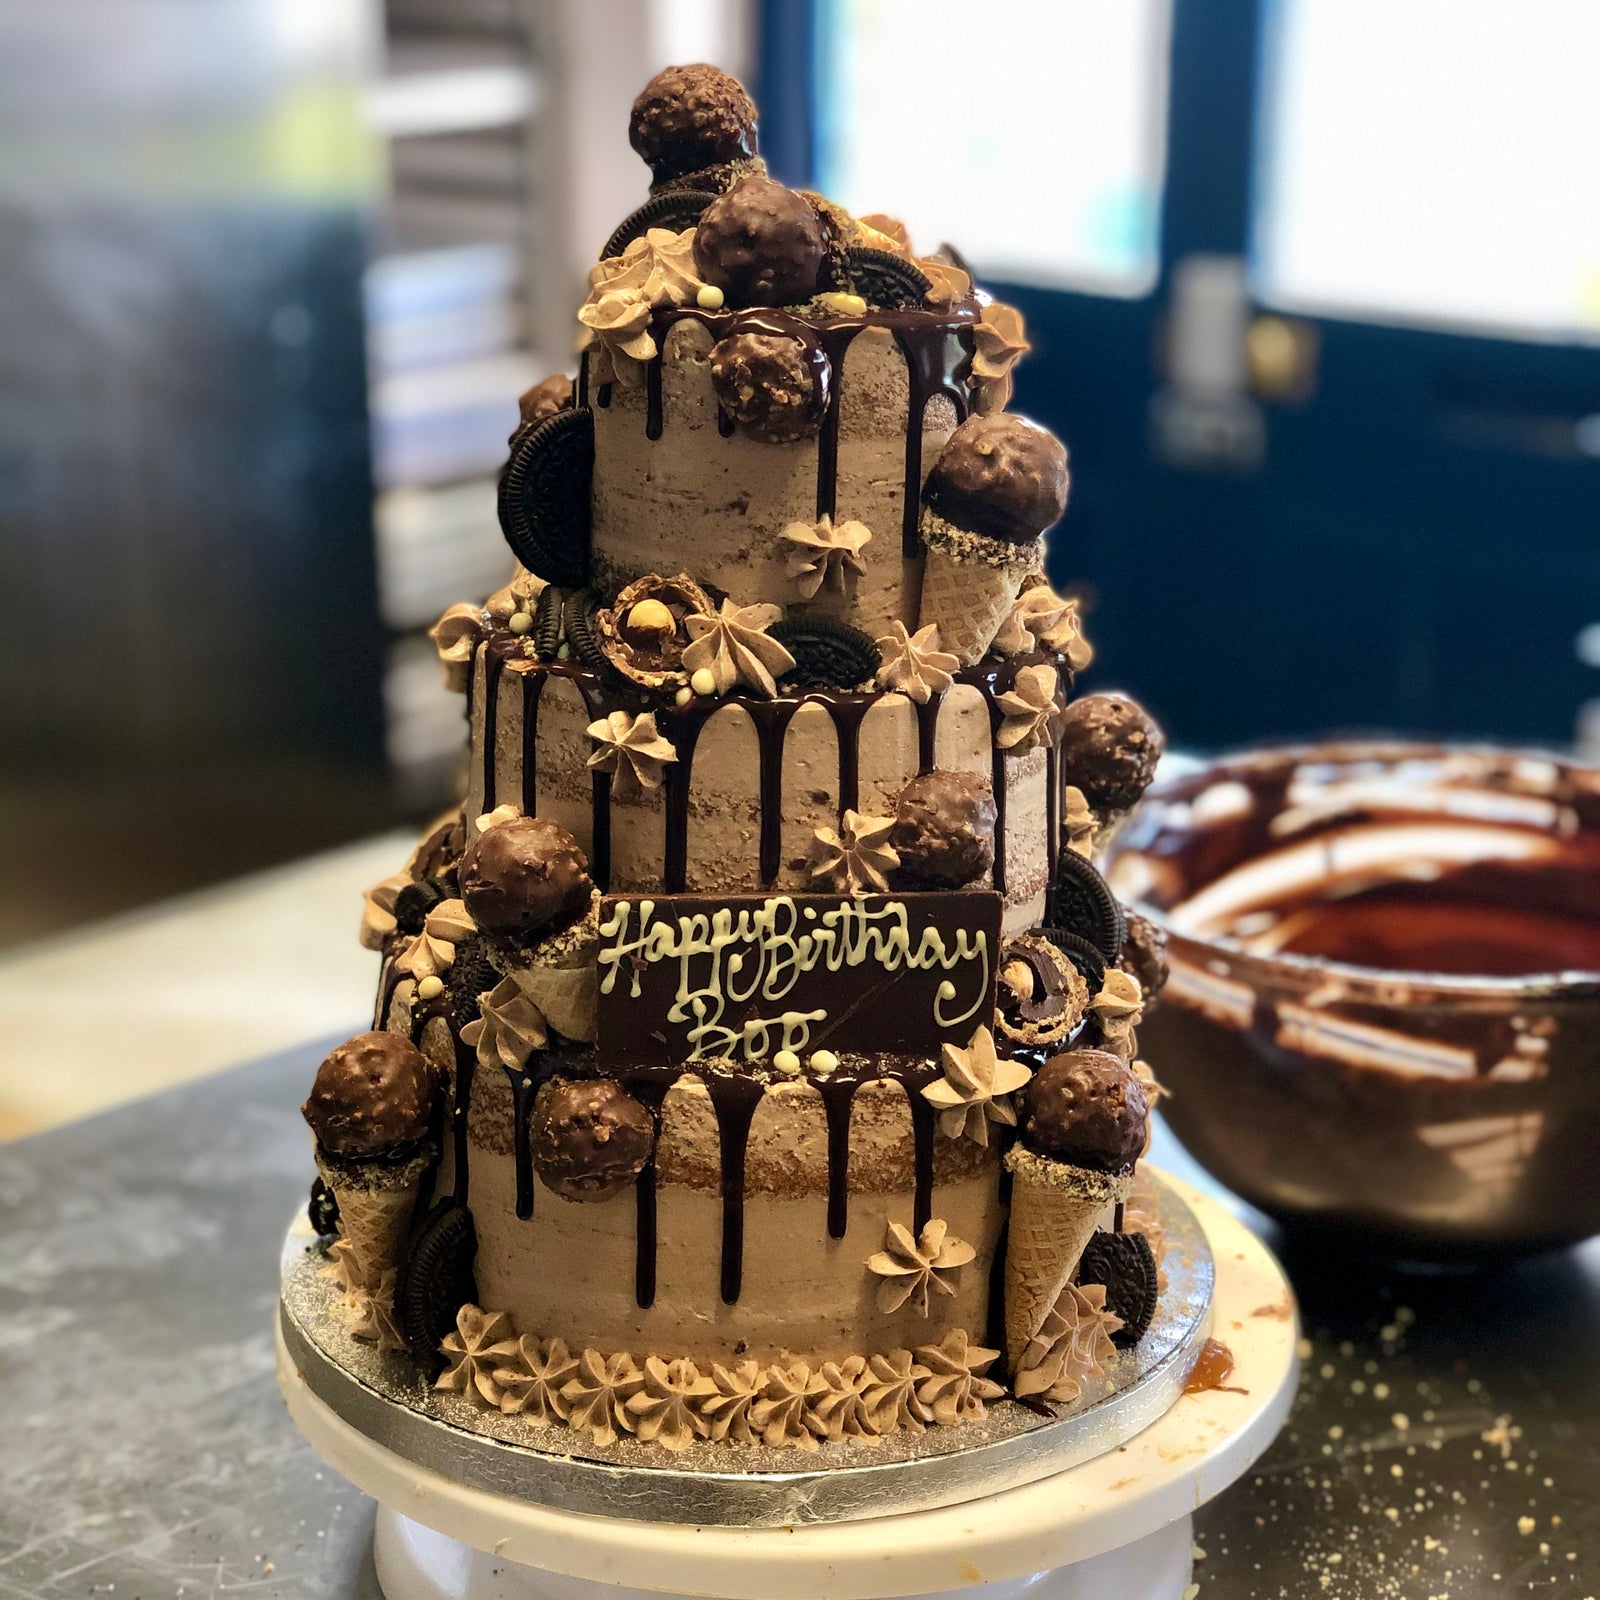 Carlo's Bakery Cake Boss Chocolate Fudge Cake, Large 10” Size - Serves 18  to 24 - Birthday Cakes and Treats for Delivery - Baked Fresh Daily,  Delivered Frozen in Dry Ice - Walmart.com